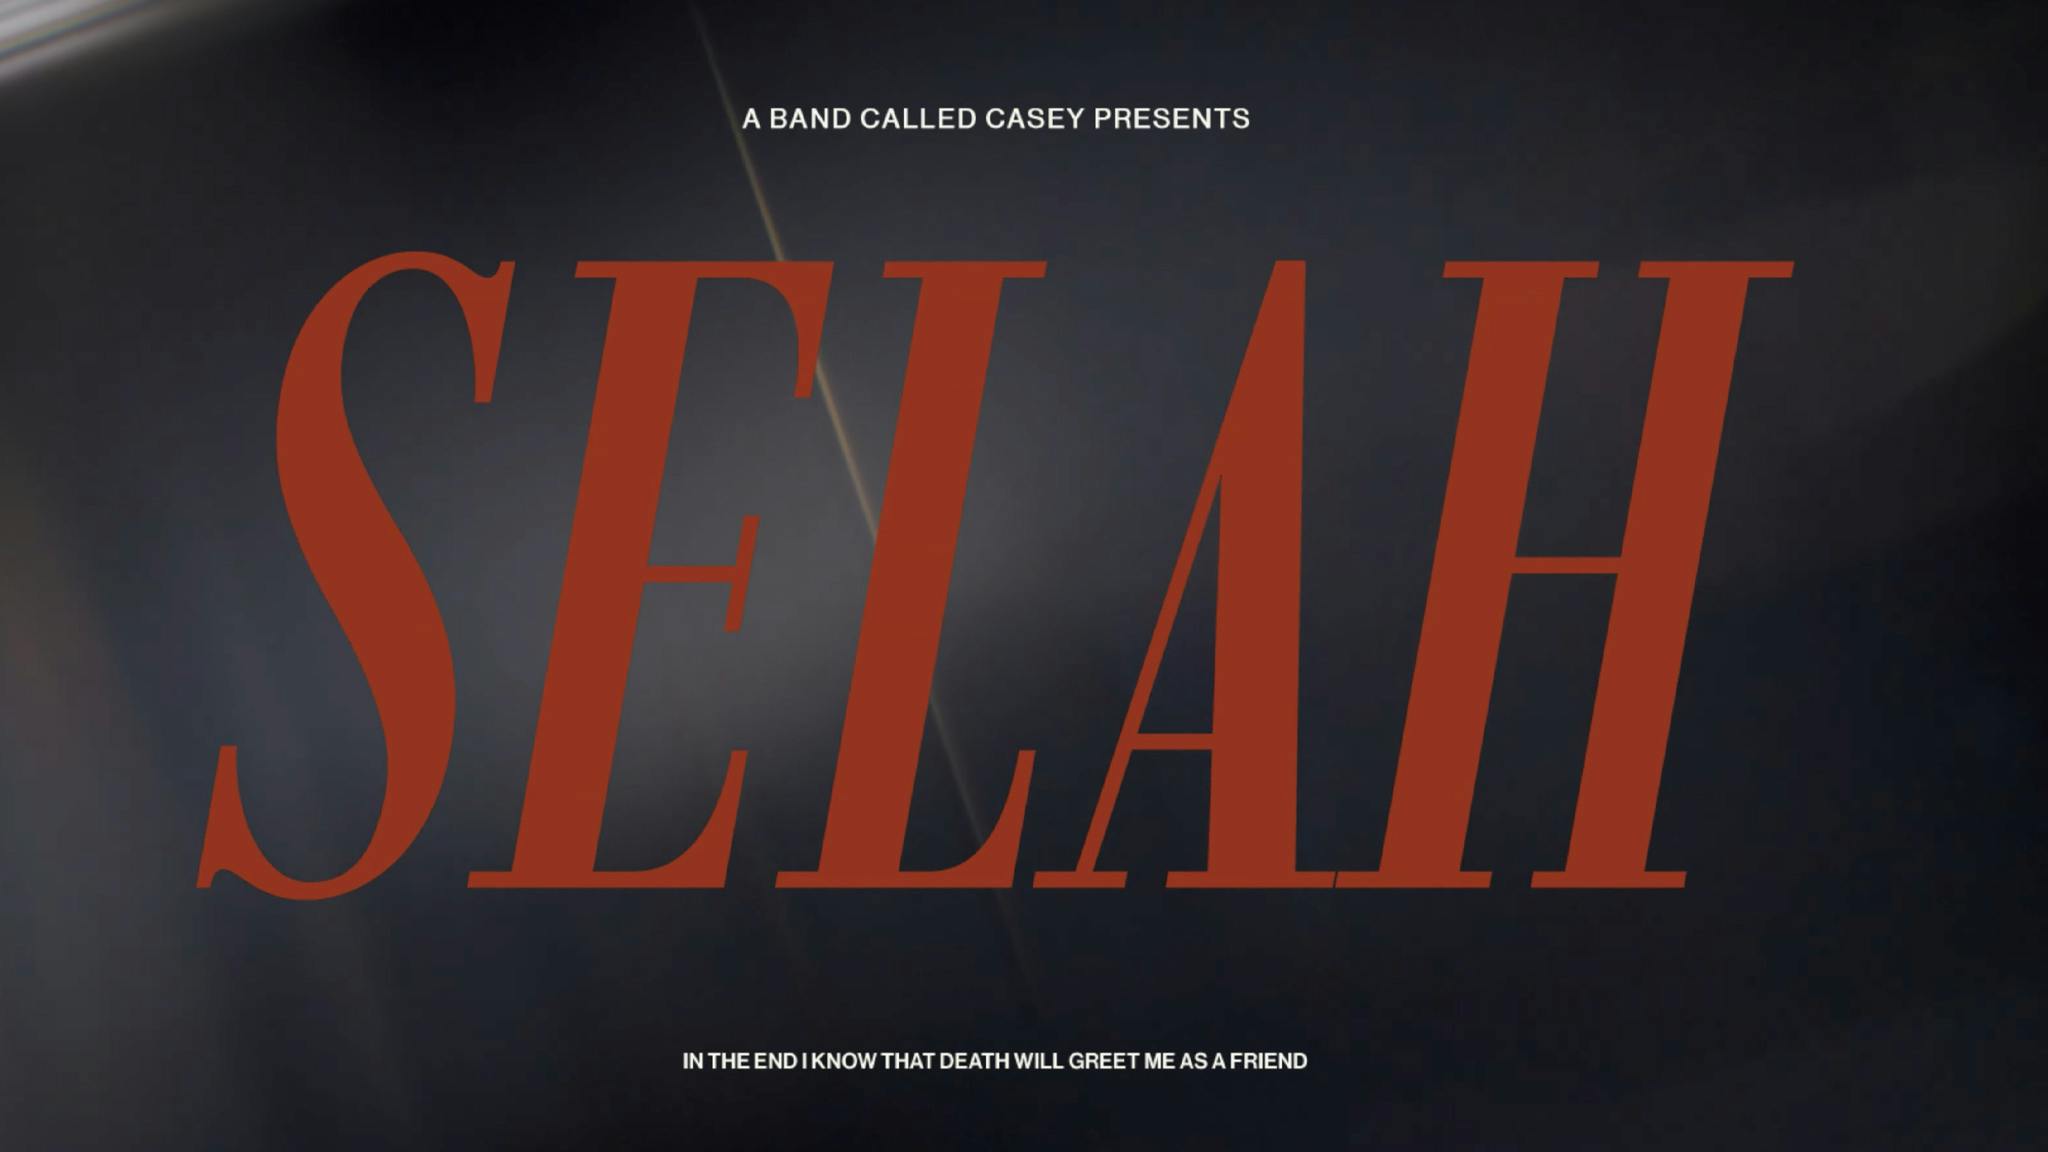 Casey have released a beautiful new single, Selah